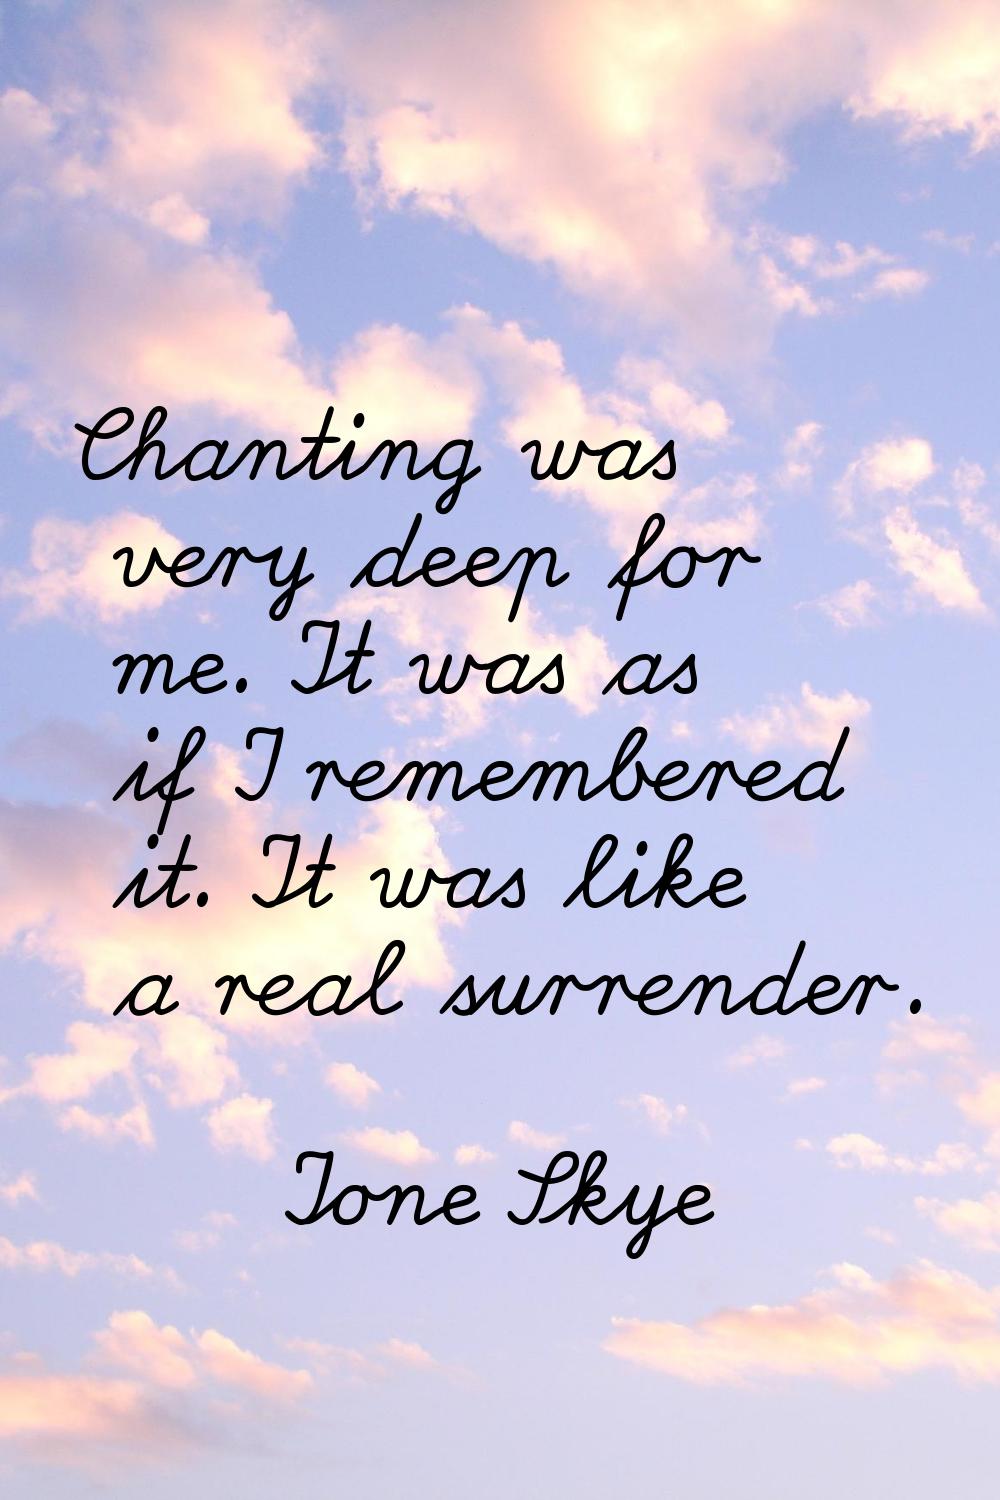 Chanting was very deep for me. It was as if I remembered it. It was like a real surrender.